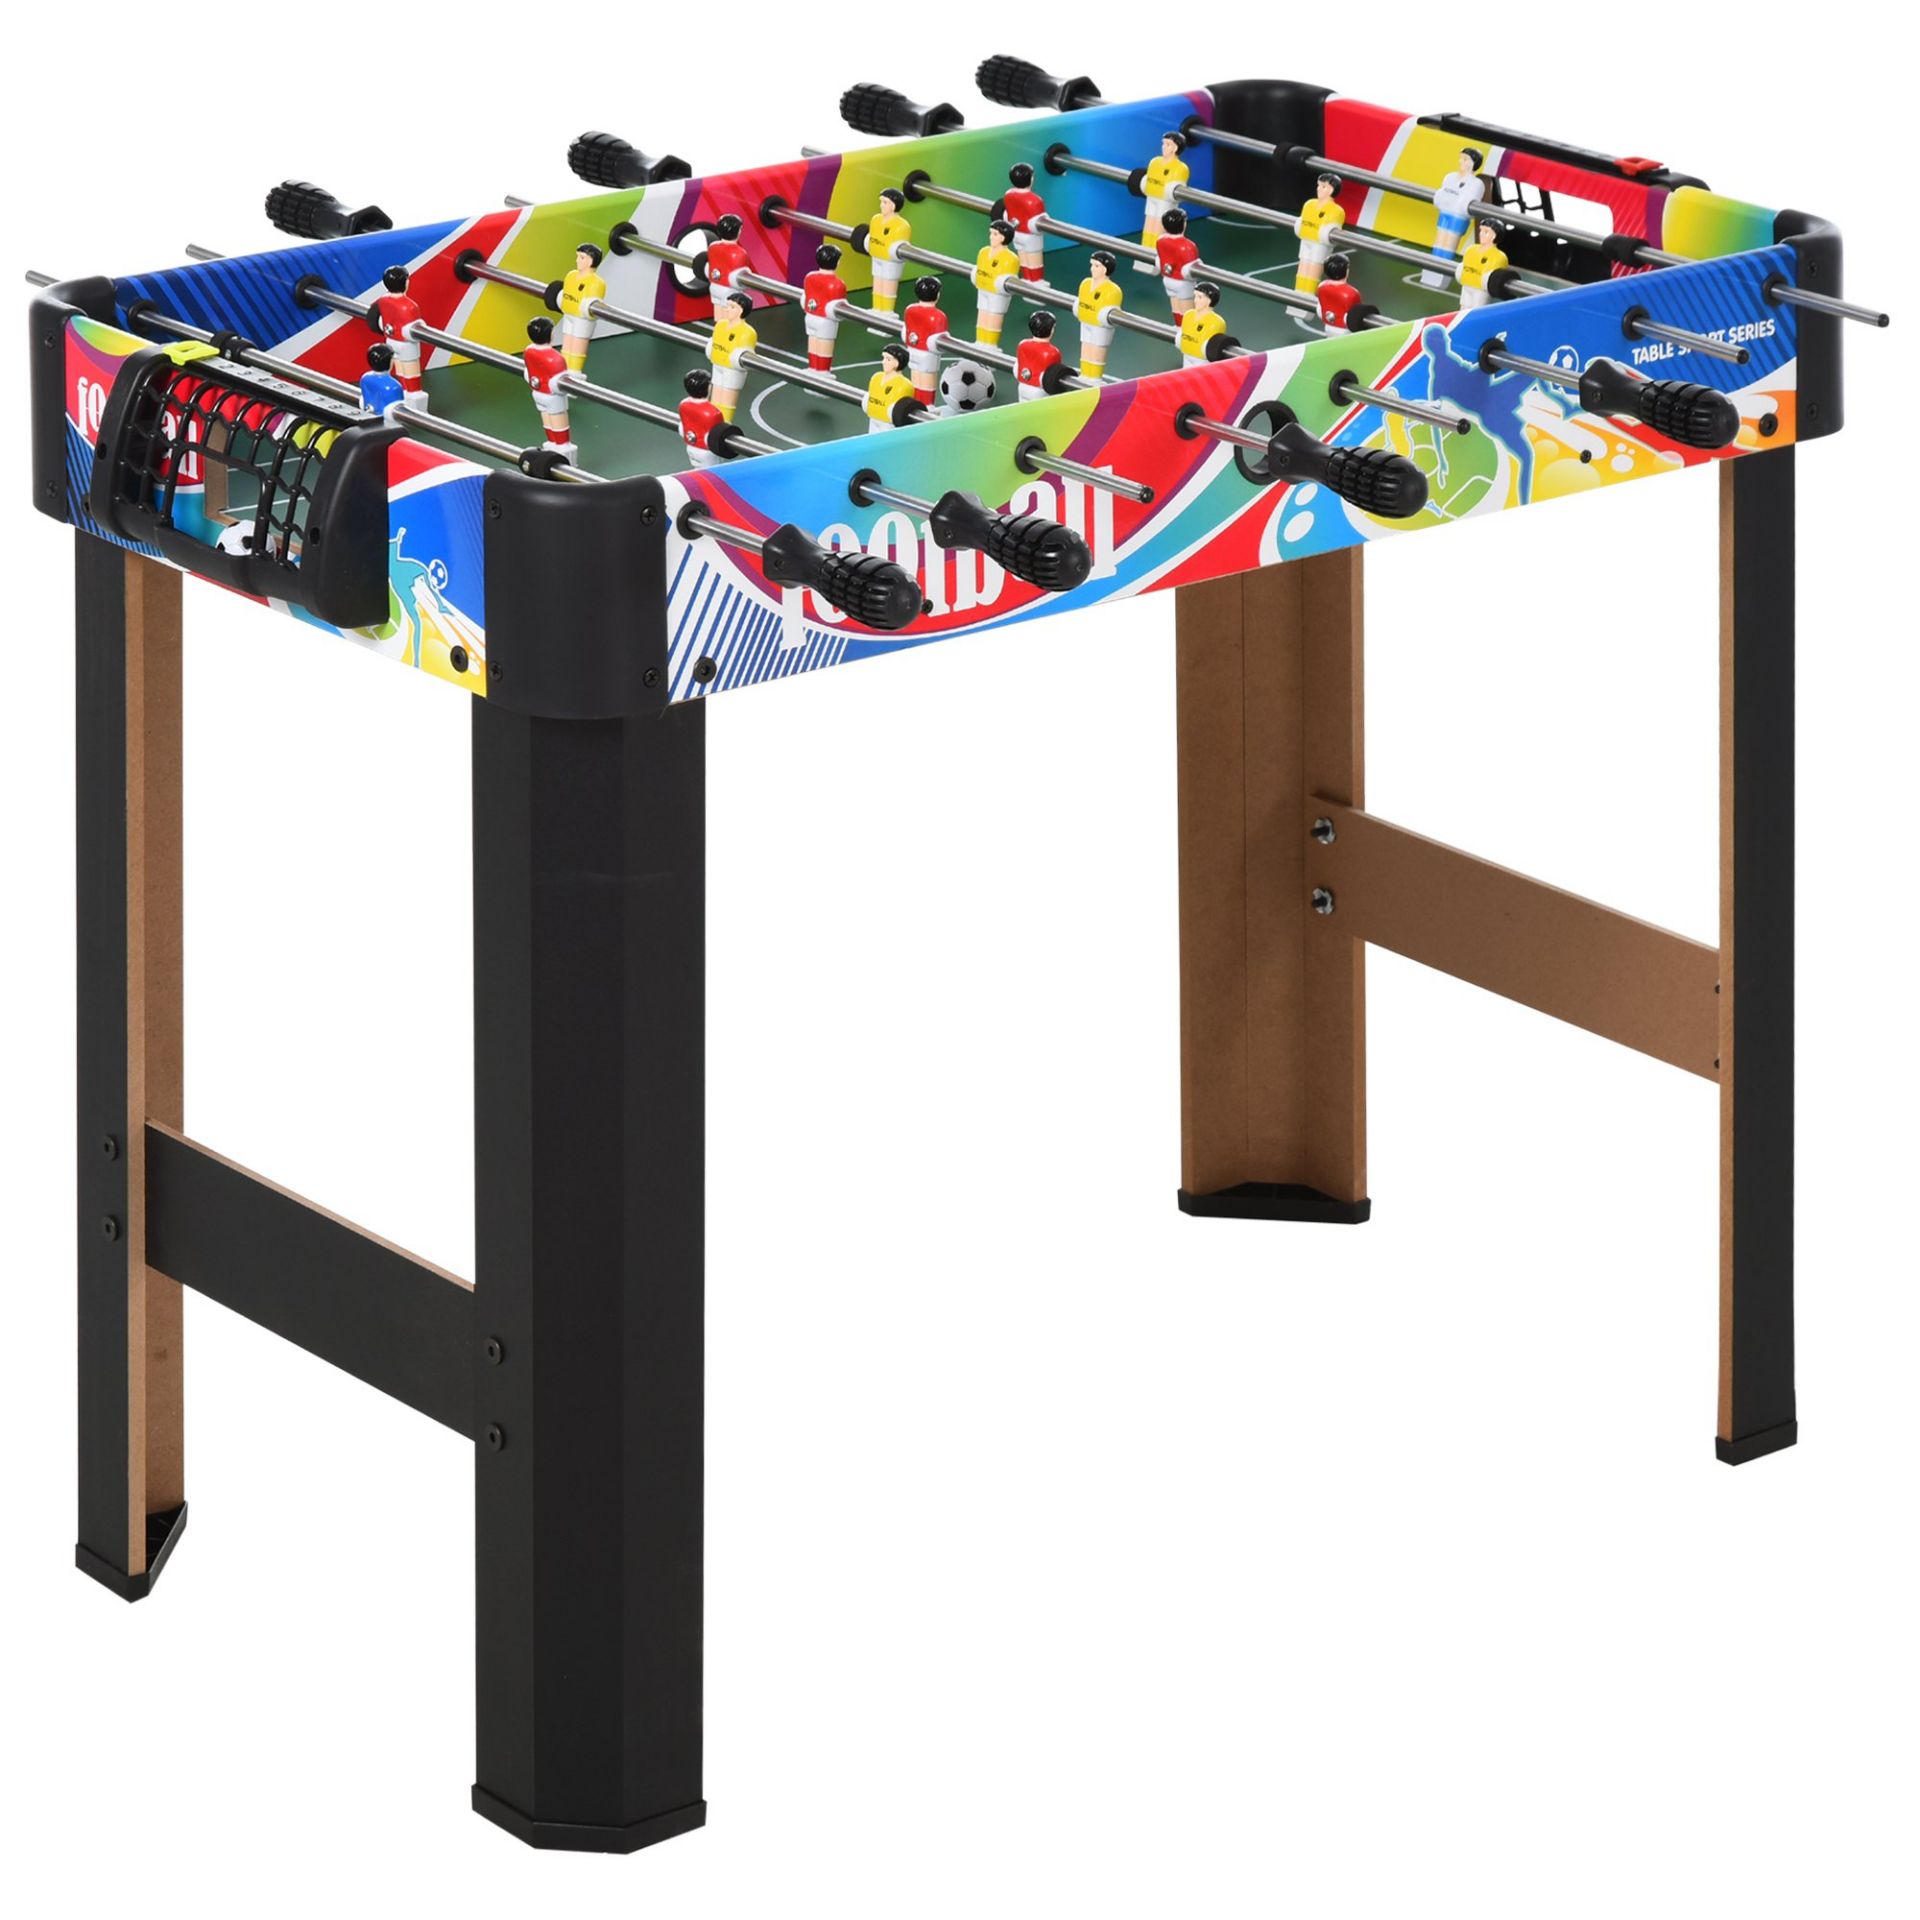 |1x | HOMCOM 2.8FT INDOOR MDF FOOTBALL TABLE MULTI-COLOUR | UNCHECKED & BOXED | SKU A70-051 |